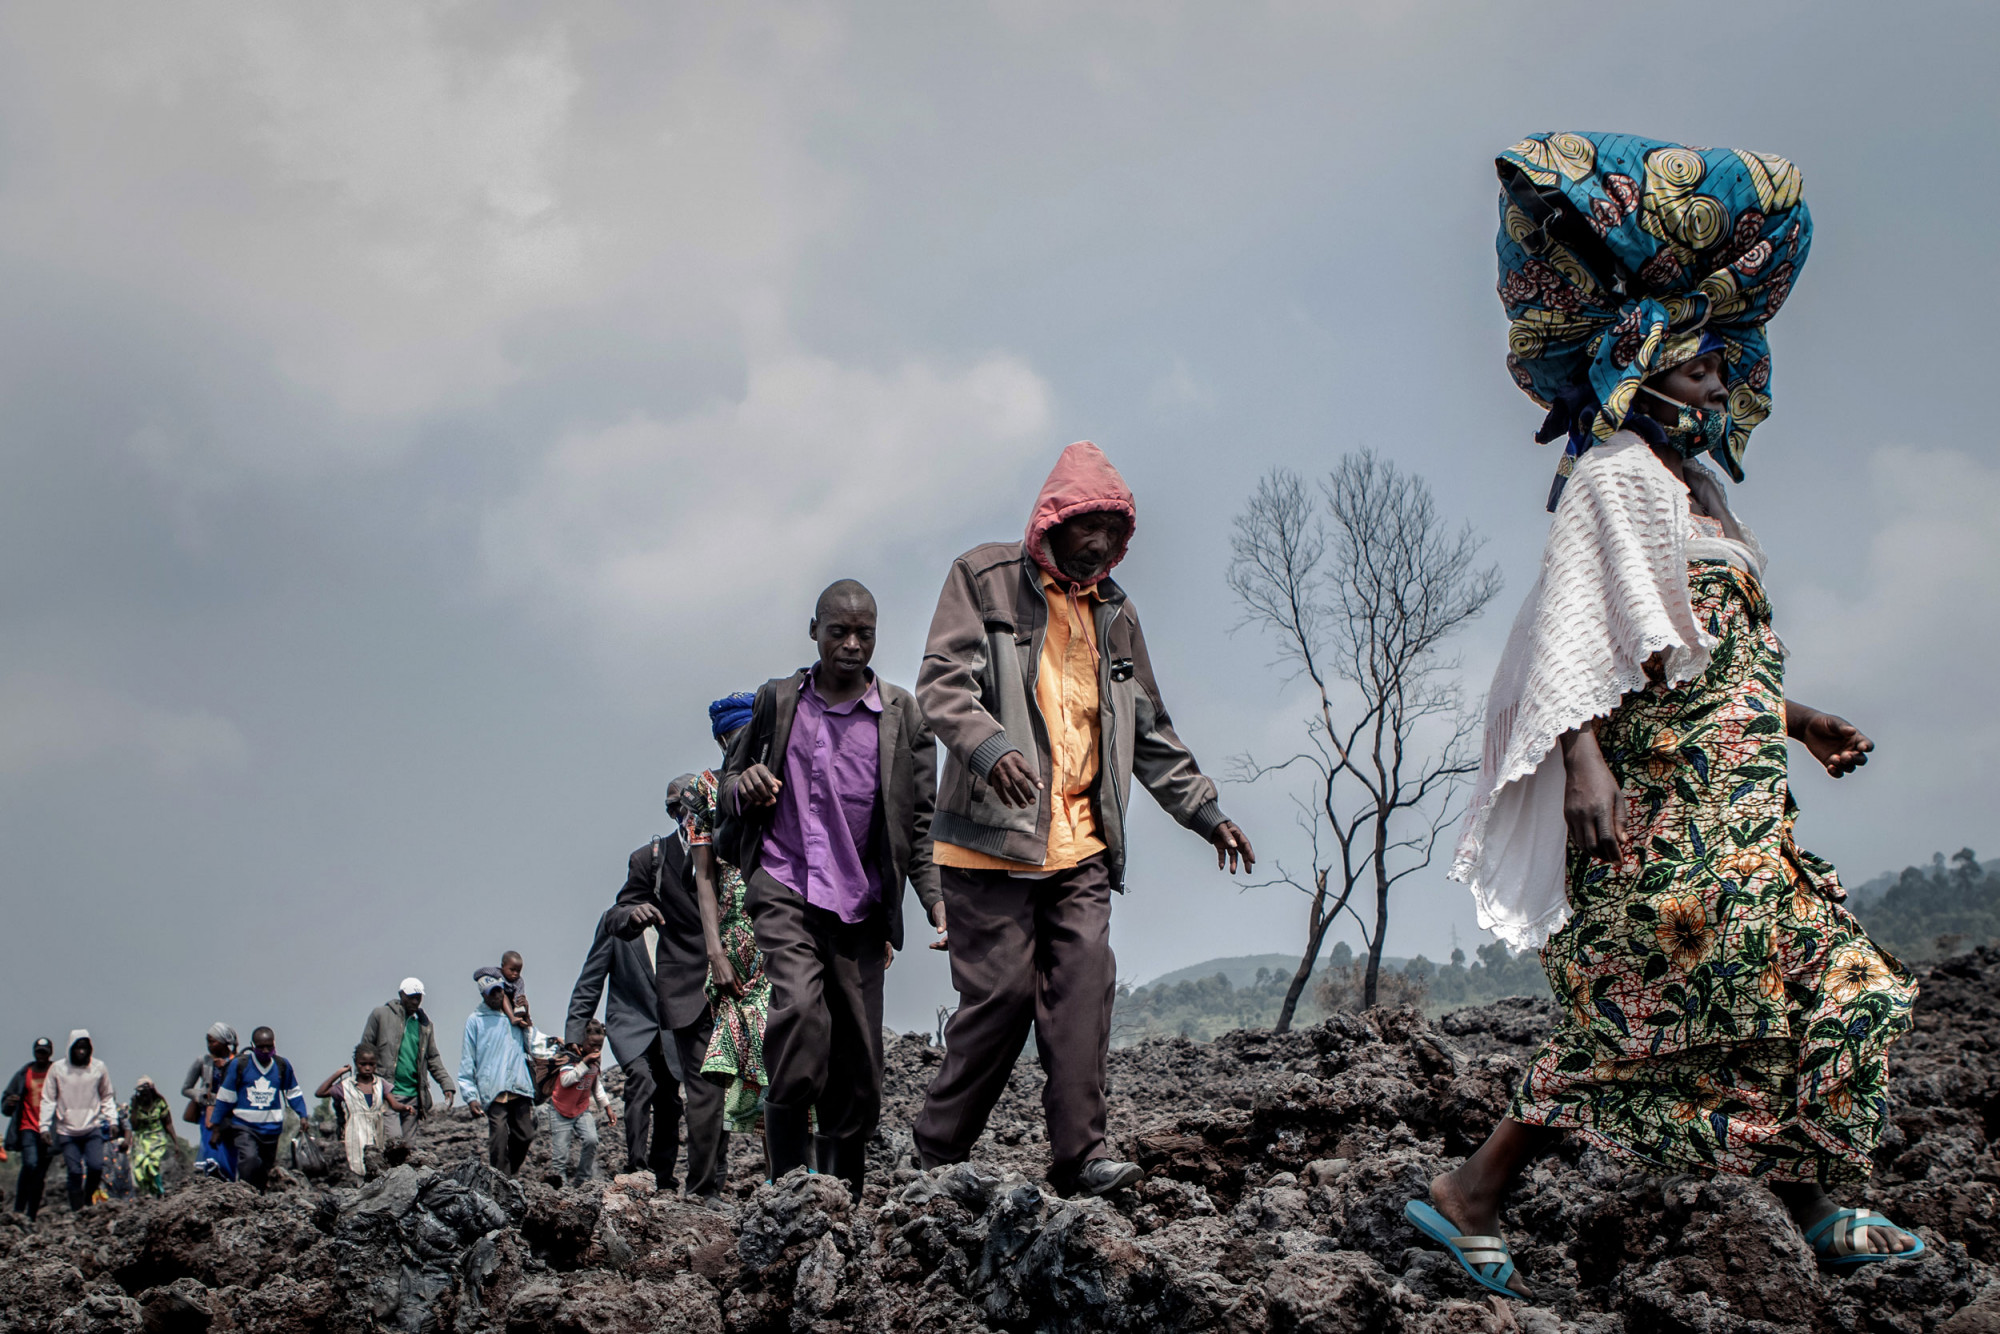 North Kivu, 23 May 2021. People cross the cooling lava flow in search of a safe place to stay while others transport goods to the market in Goma two days after the eruption. © Guerchom Ndebo for Fondation Carmignac